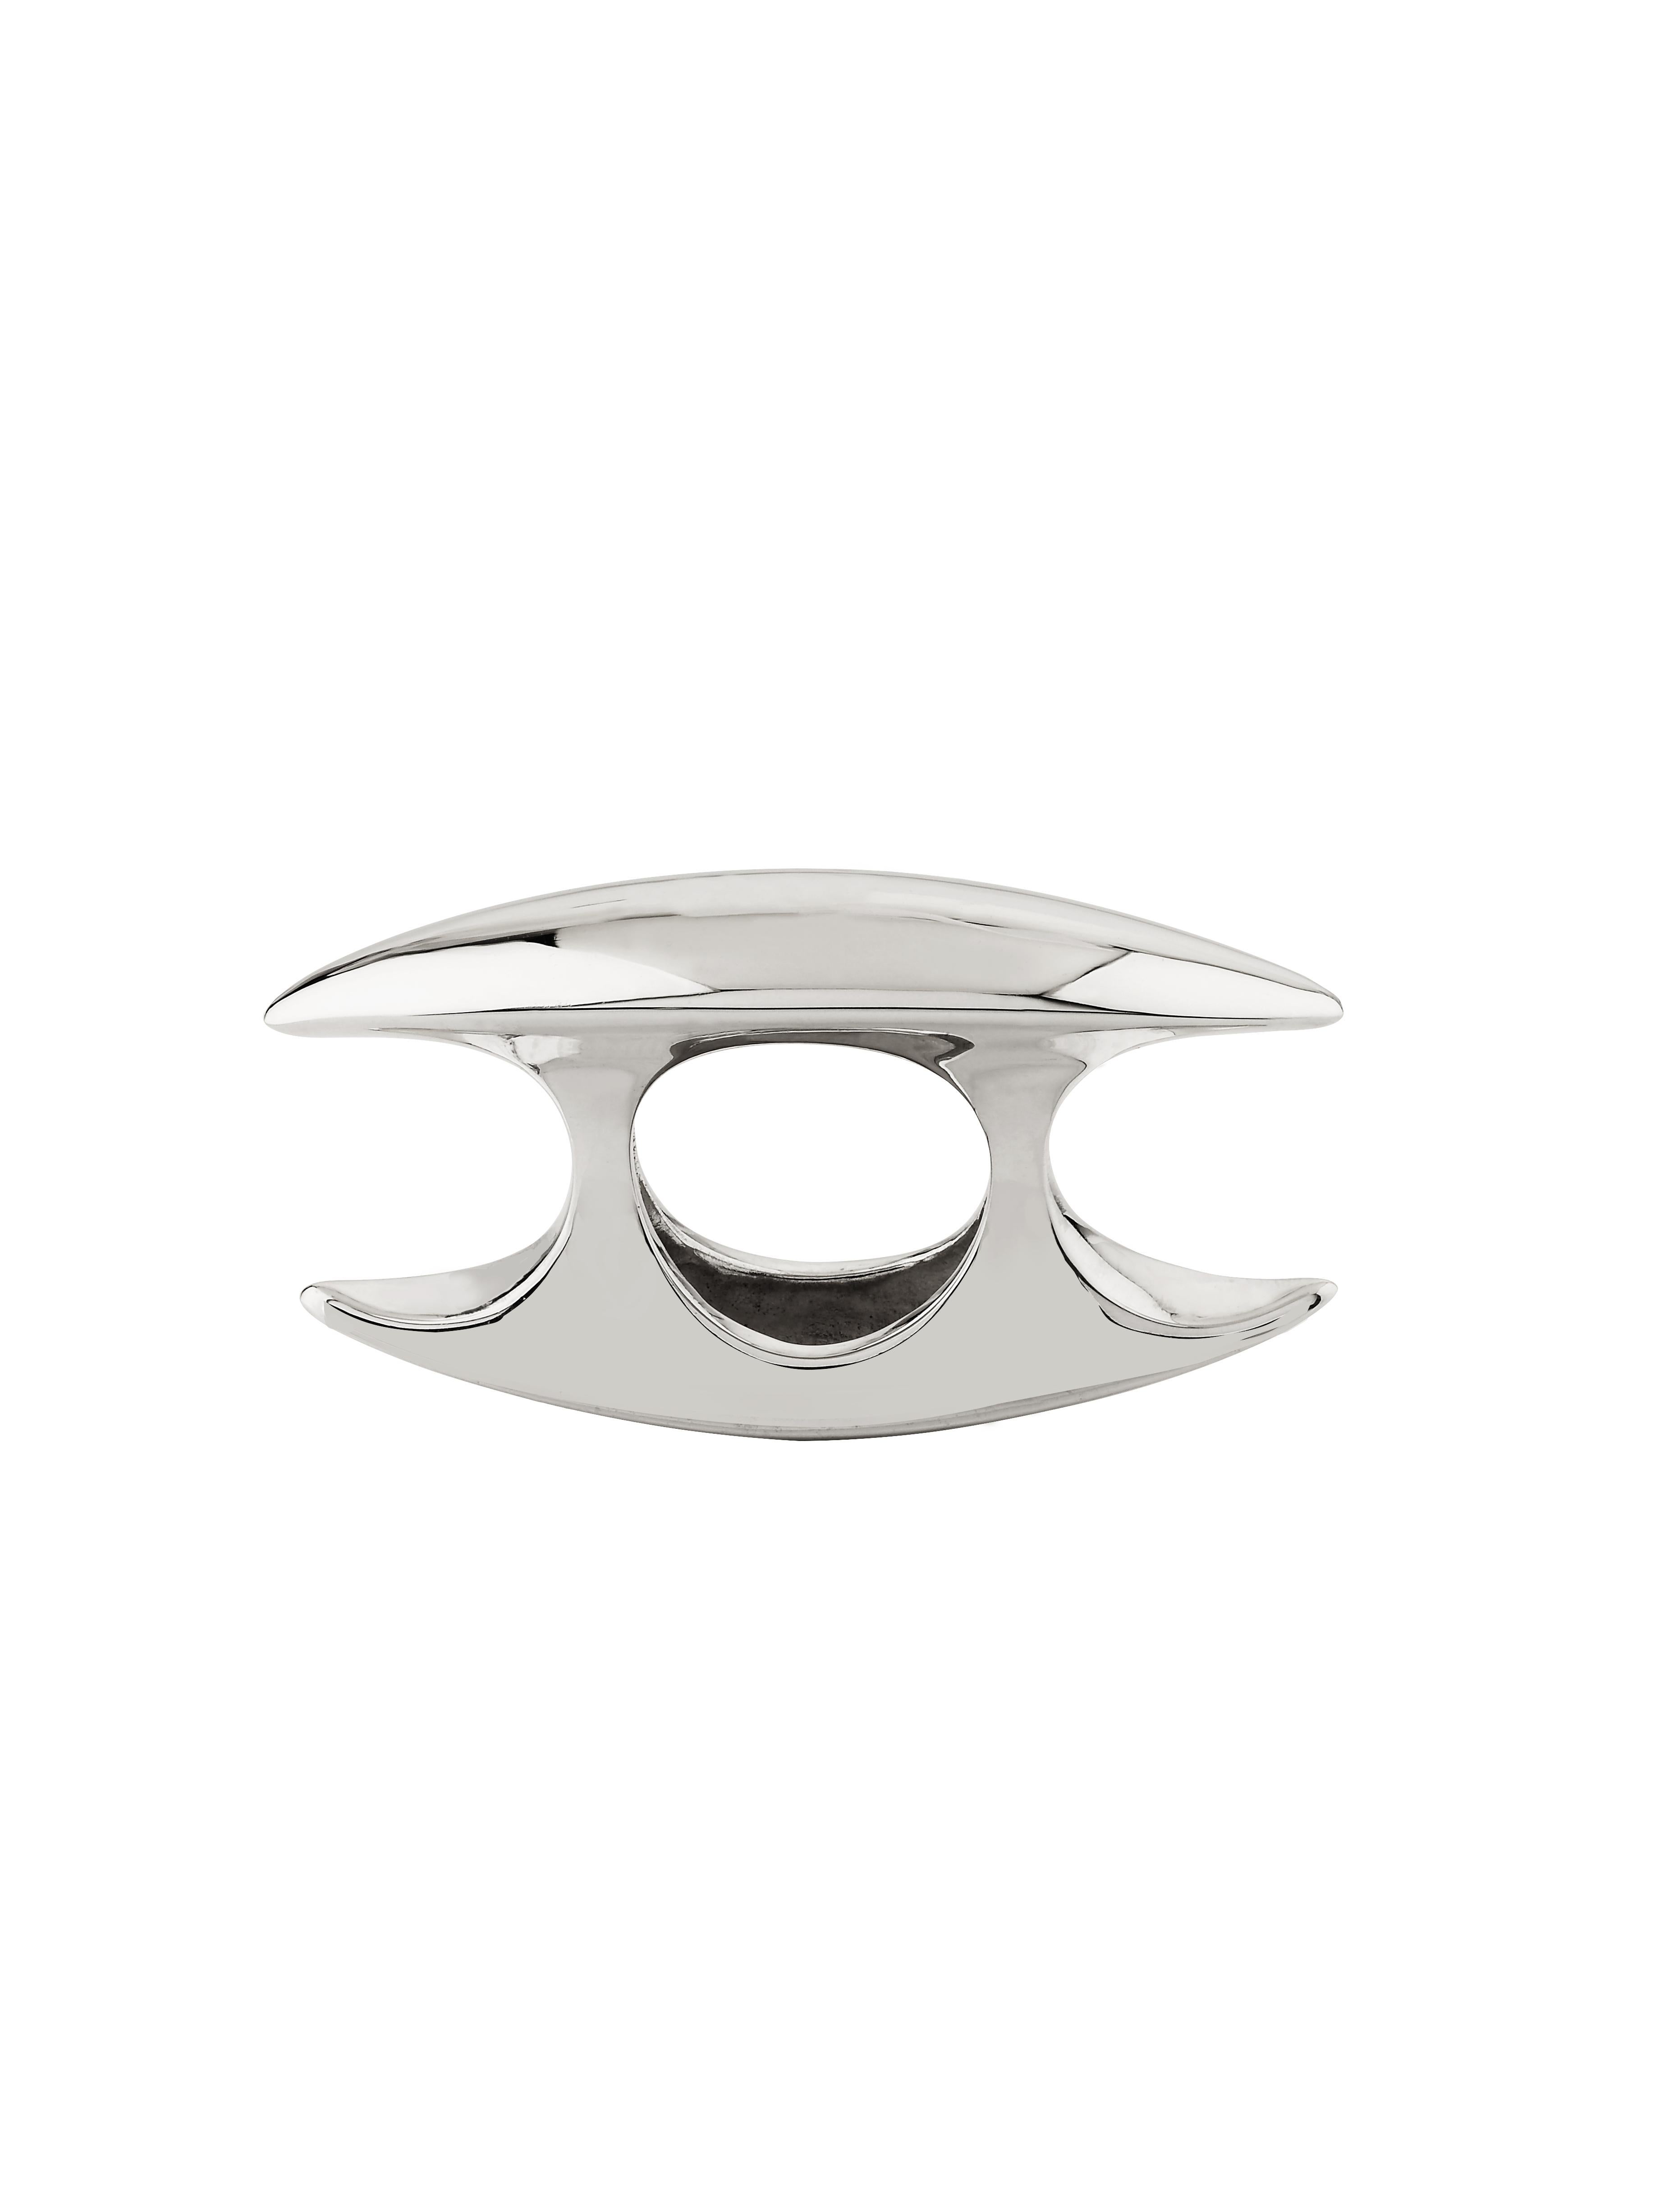 Being ready to bring joy is a fundamental aspect of the Paradise Found Fine Jewelry Collection and the Pod Massage Ring is crafted to offer two distinct sensations. The smooth pod-shaped surfaces are designed for massaging various parts of the body,